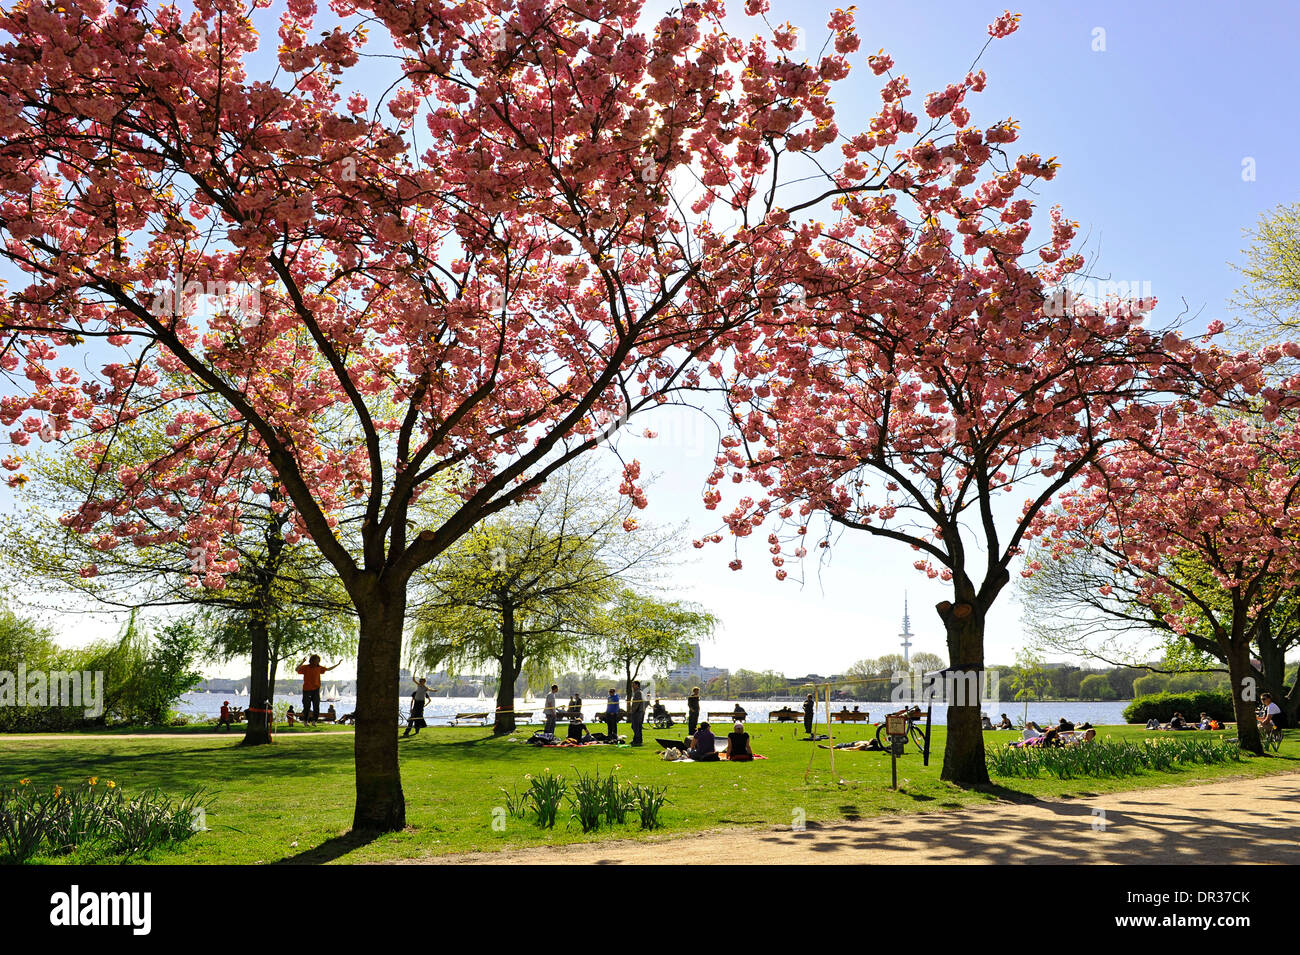 Start of spring, blossoming cherry trees alongside the Outer Alster lake, Hanseatic city of Hamburg, Germany, Europe Stock Photo